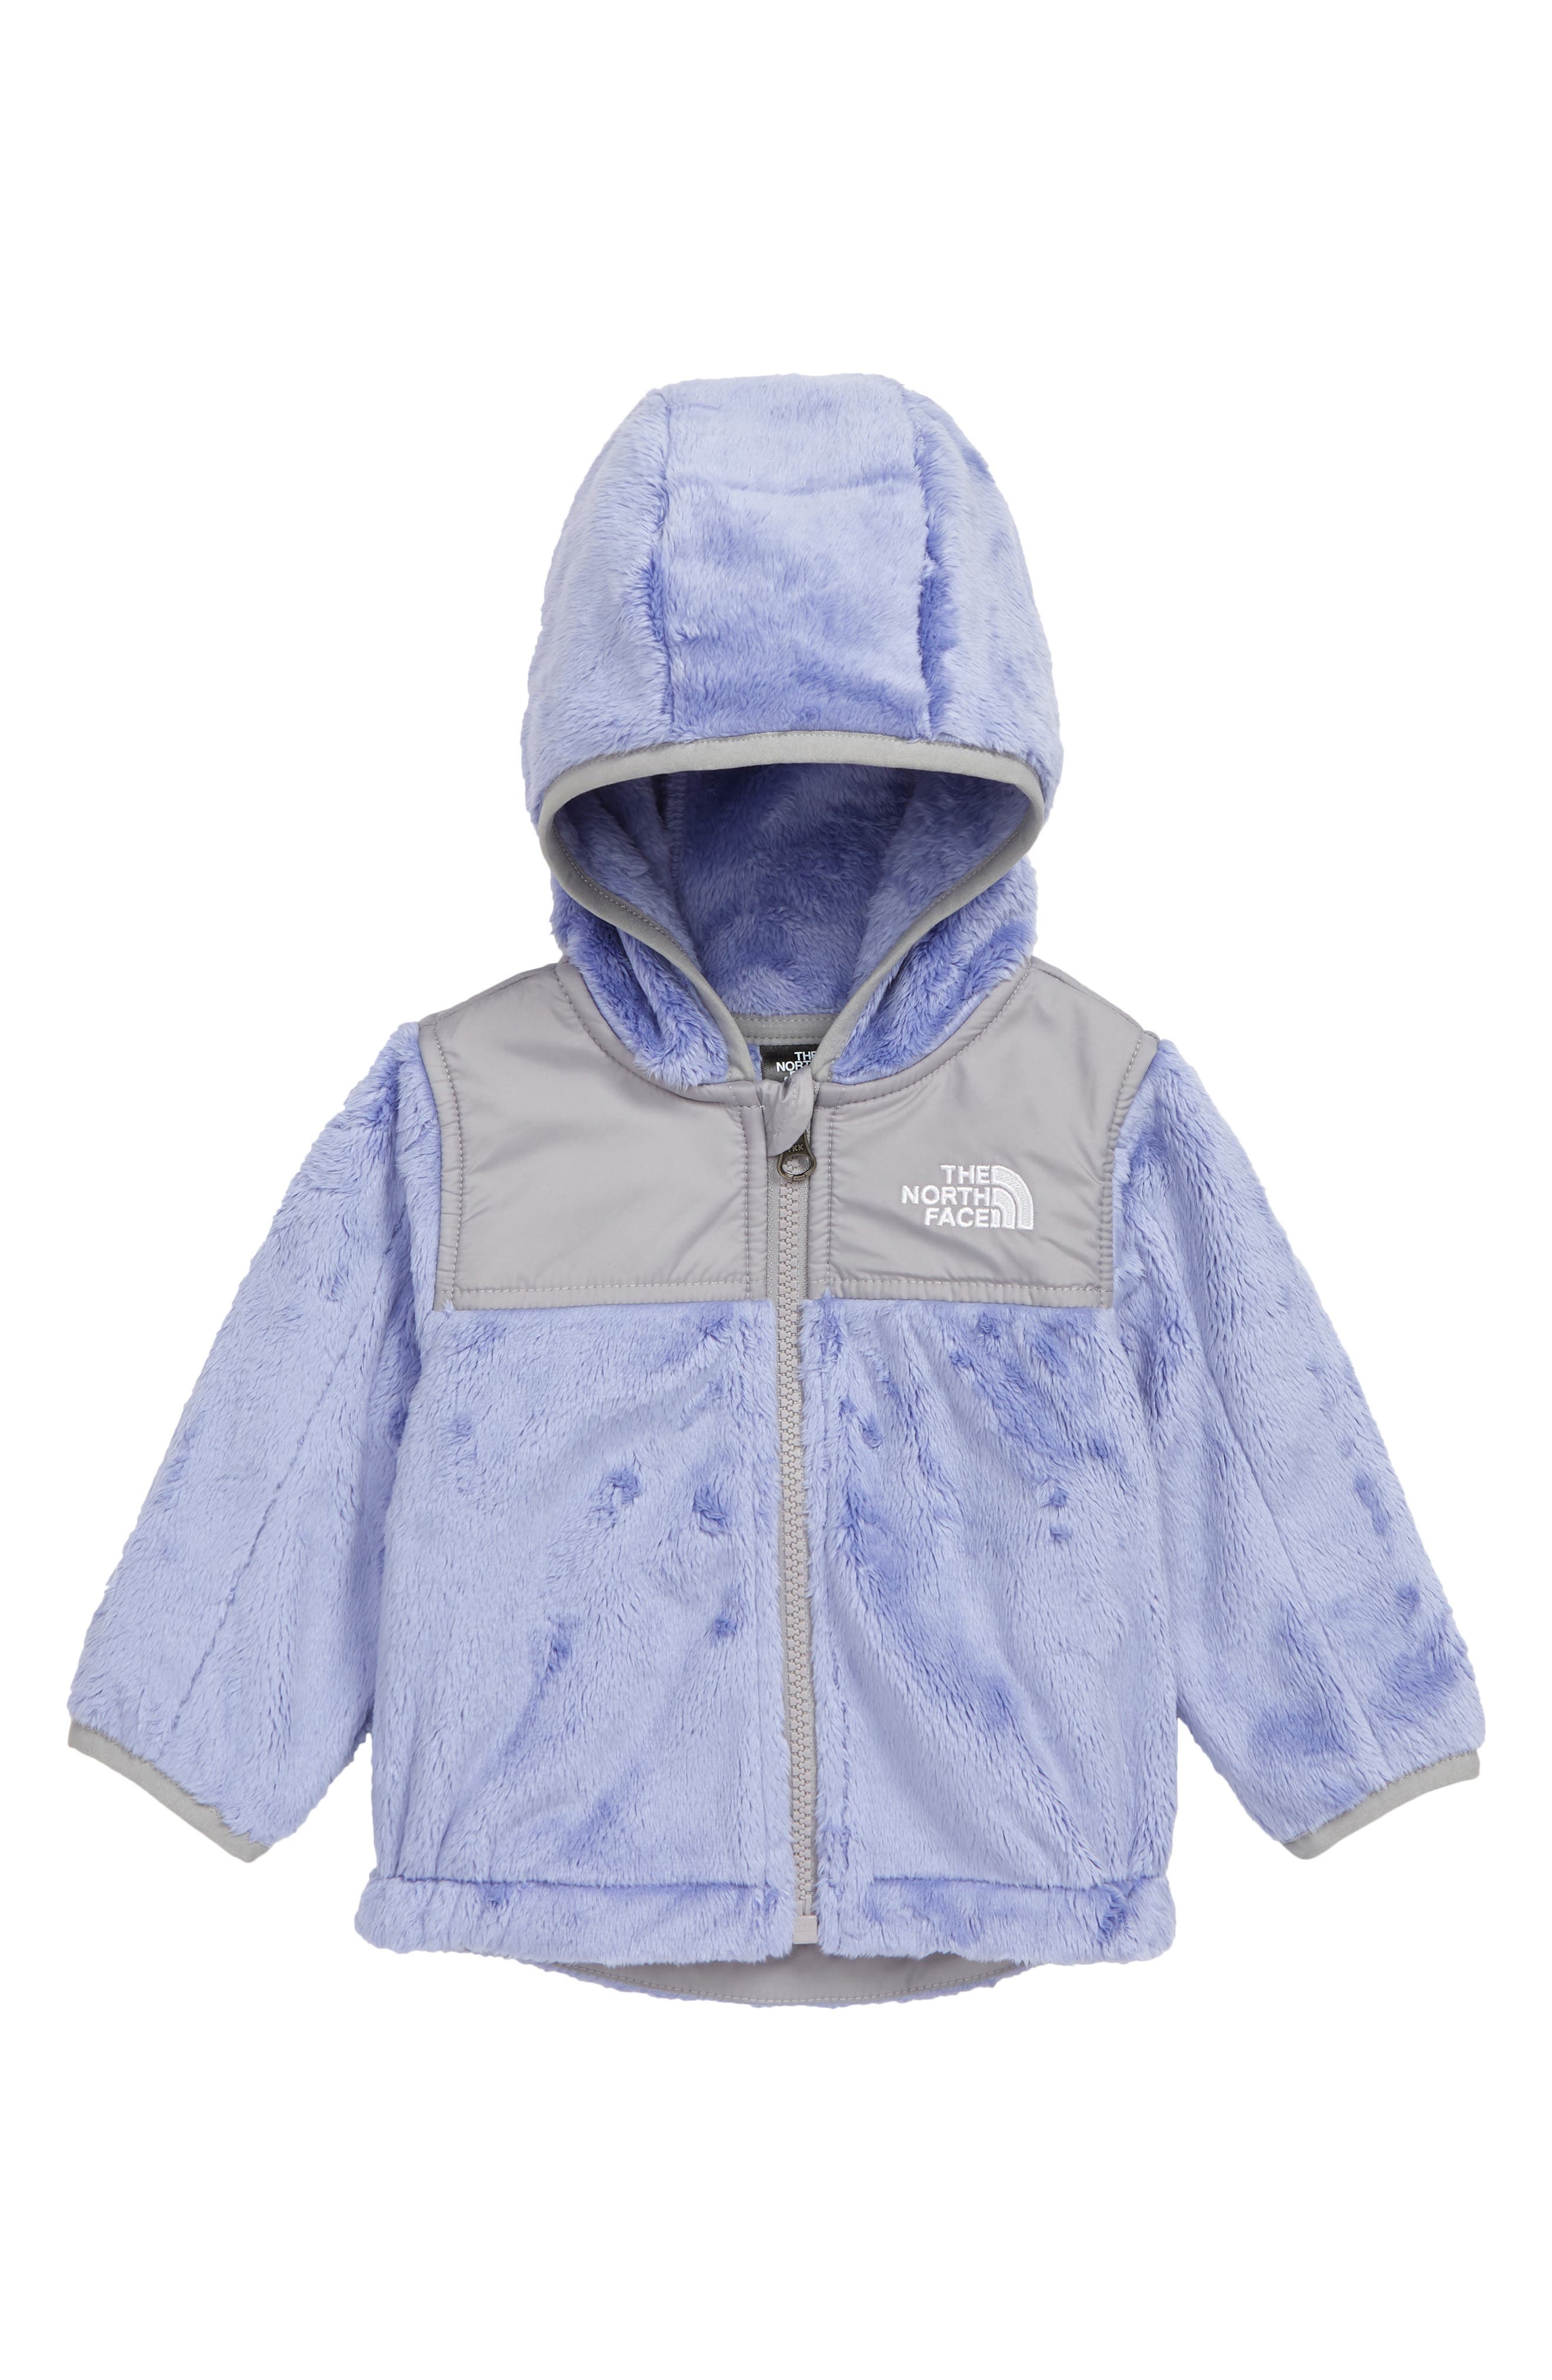 Pam GM Greece Baby and Toddler Jacket 